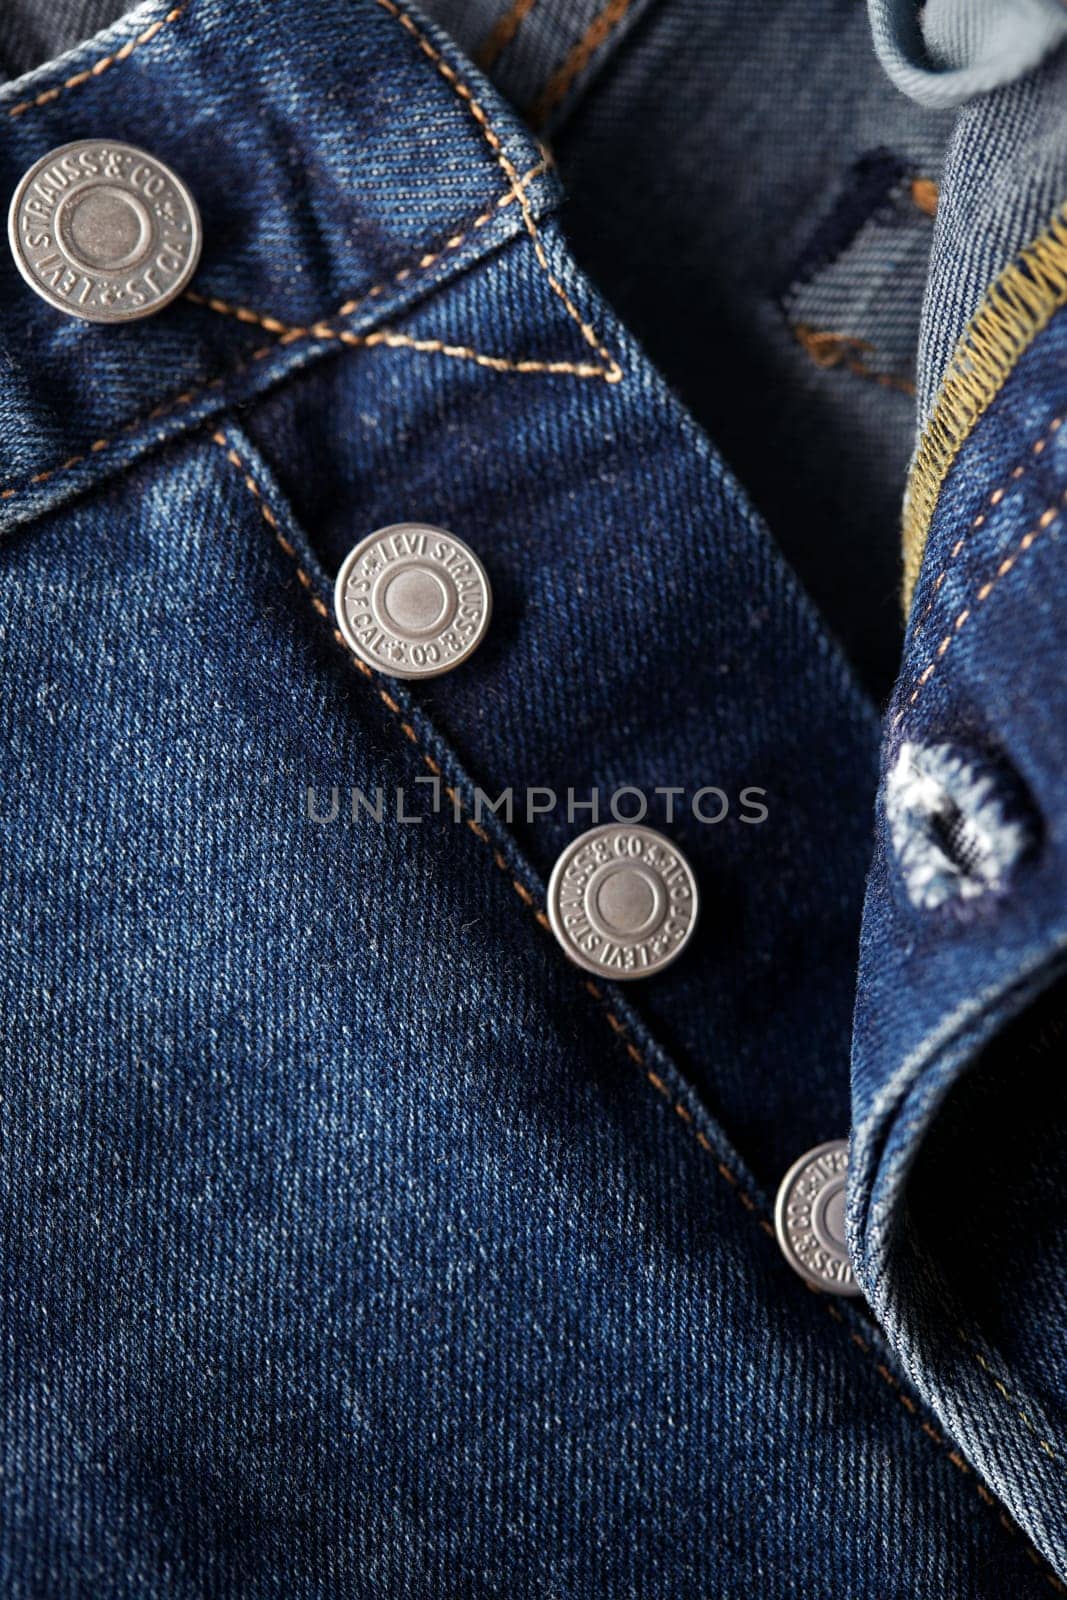 Close up of the details of new LEVI'S 501 Jeans. Seams and button fly close-up. Classic jeans model. LEVI'S is a brand name of Levi Strauss and Co, founded in 1853. 31.12.2021, Rostov, Russia by EvgeniyQW